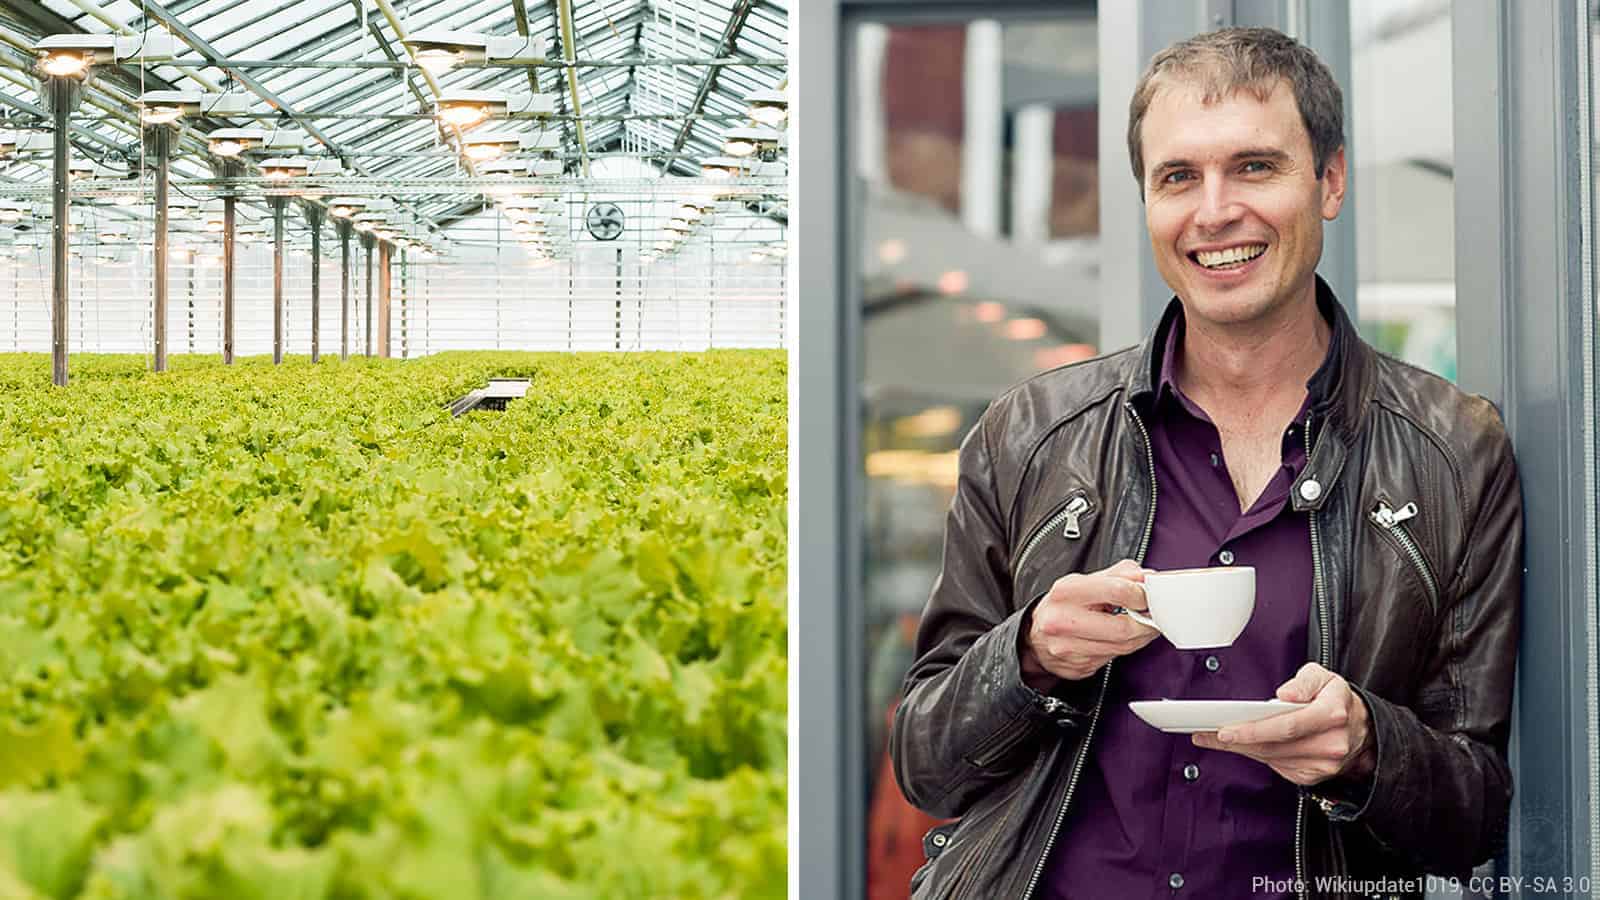 Kimbal Musk Starts the Million Gardens Movement to Help Feed Families